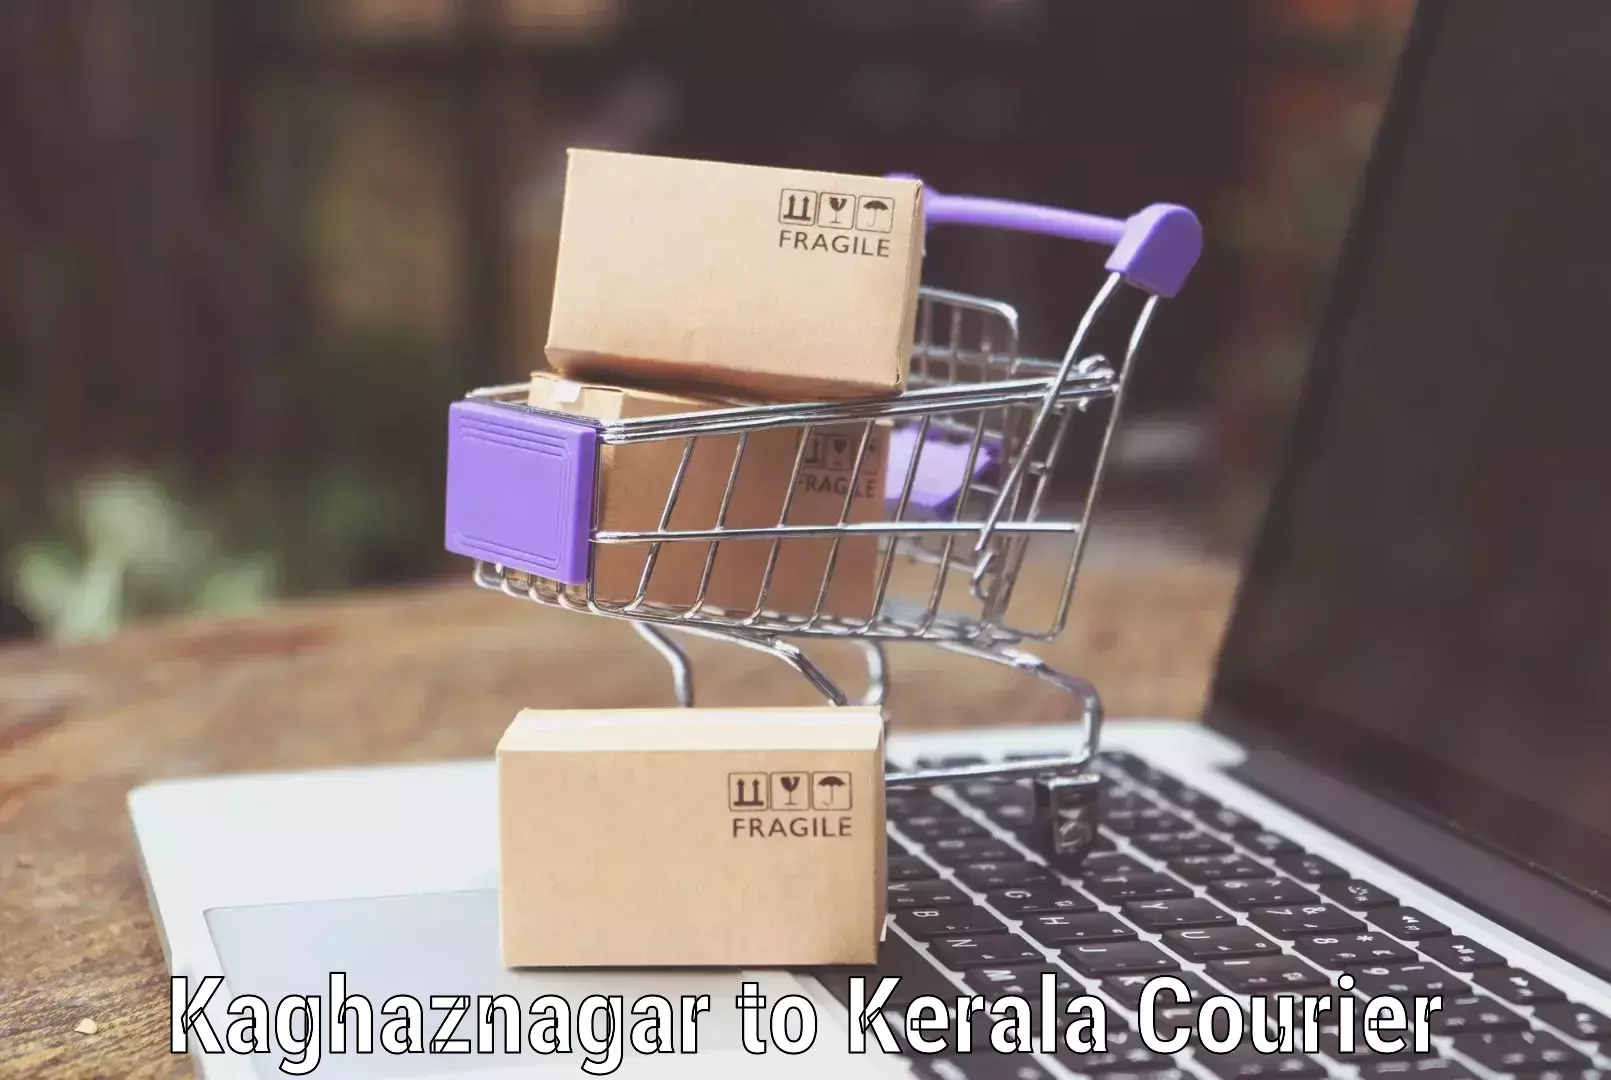 Instant baggage transport quote Kaghaznagar to Angamaly